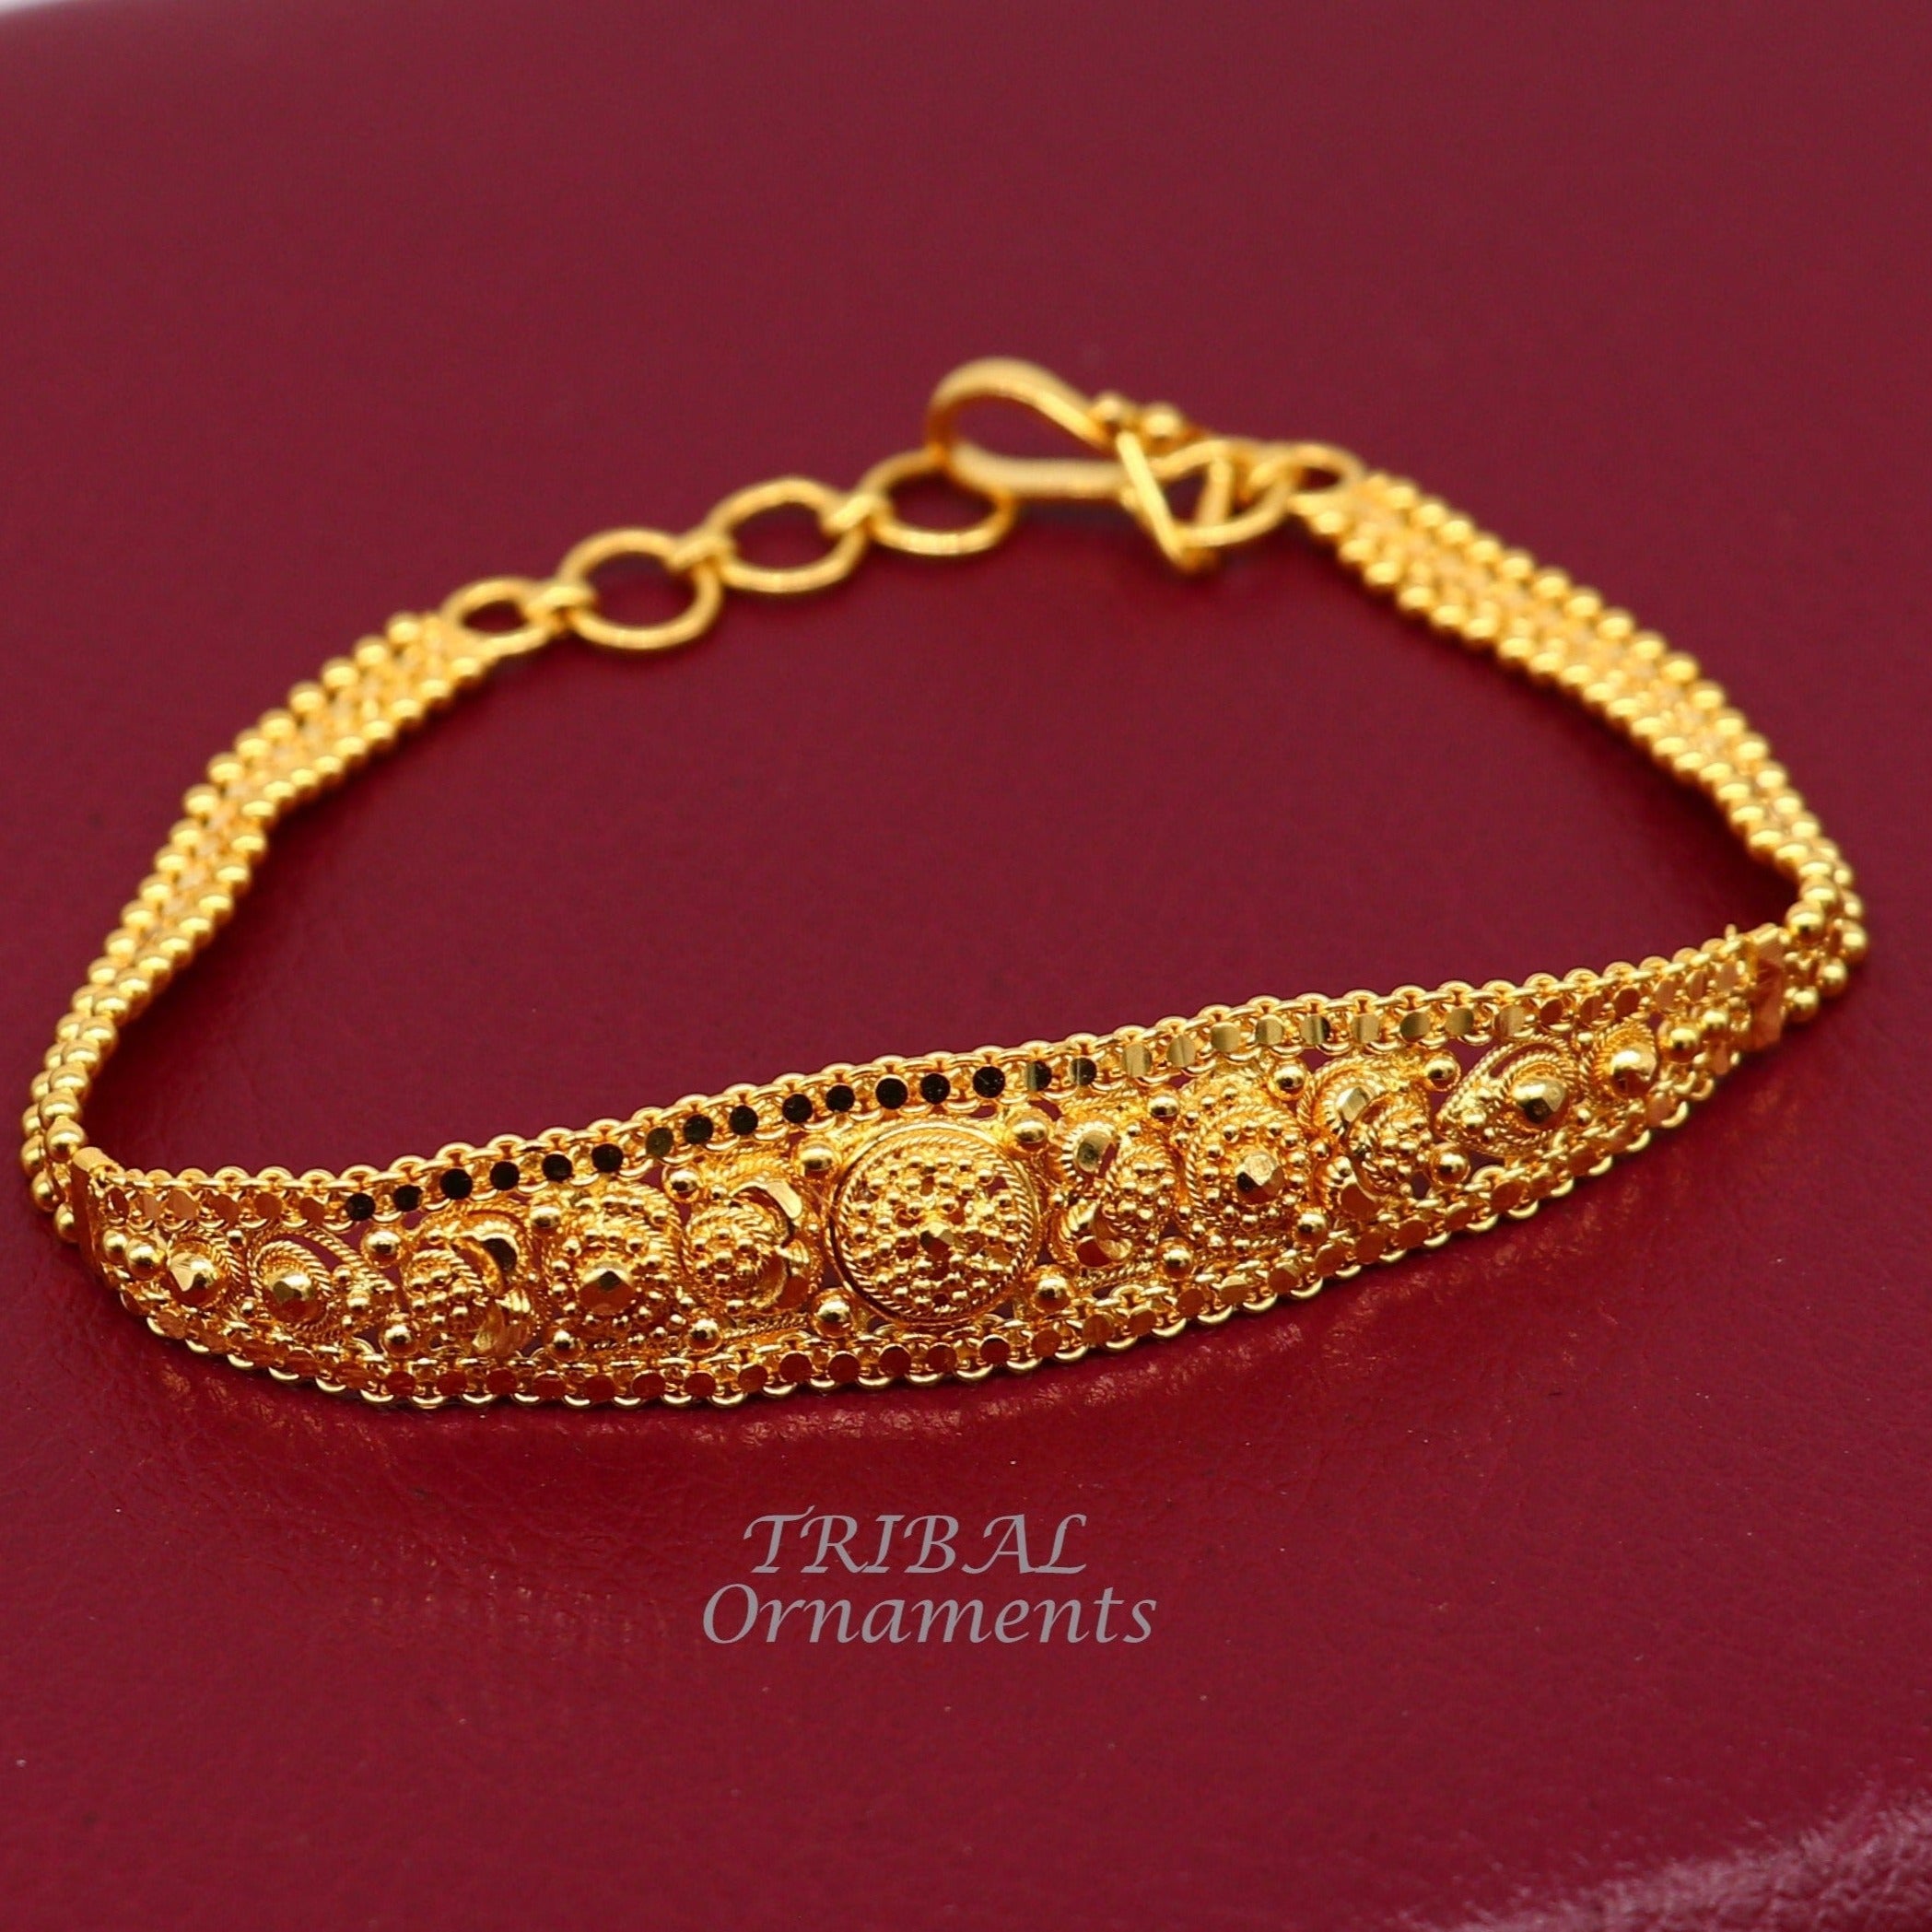 Zain jewellers - New Bracelet Designs, Sensual, Extravagant And Latest  Decadent Gold Bracelets For Weddings, Parties, Functions, Engagements,  Special And Local Use . We Have A Huge Range Of Fortitude, ‎Clout, Vigor,